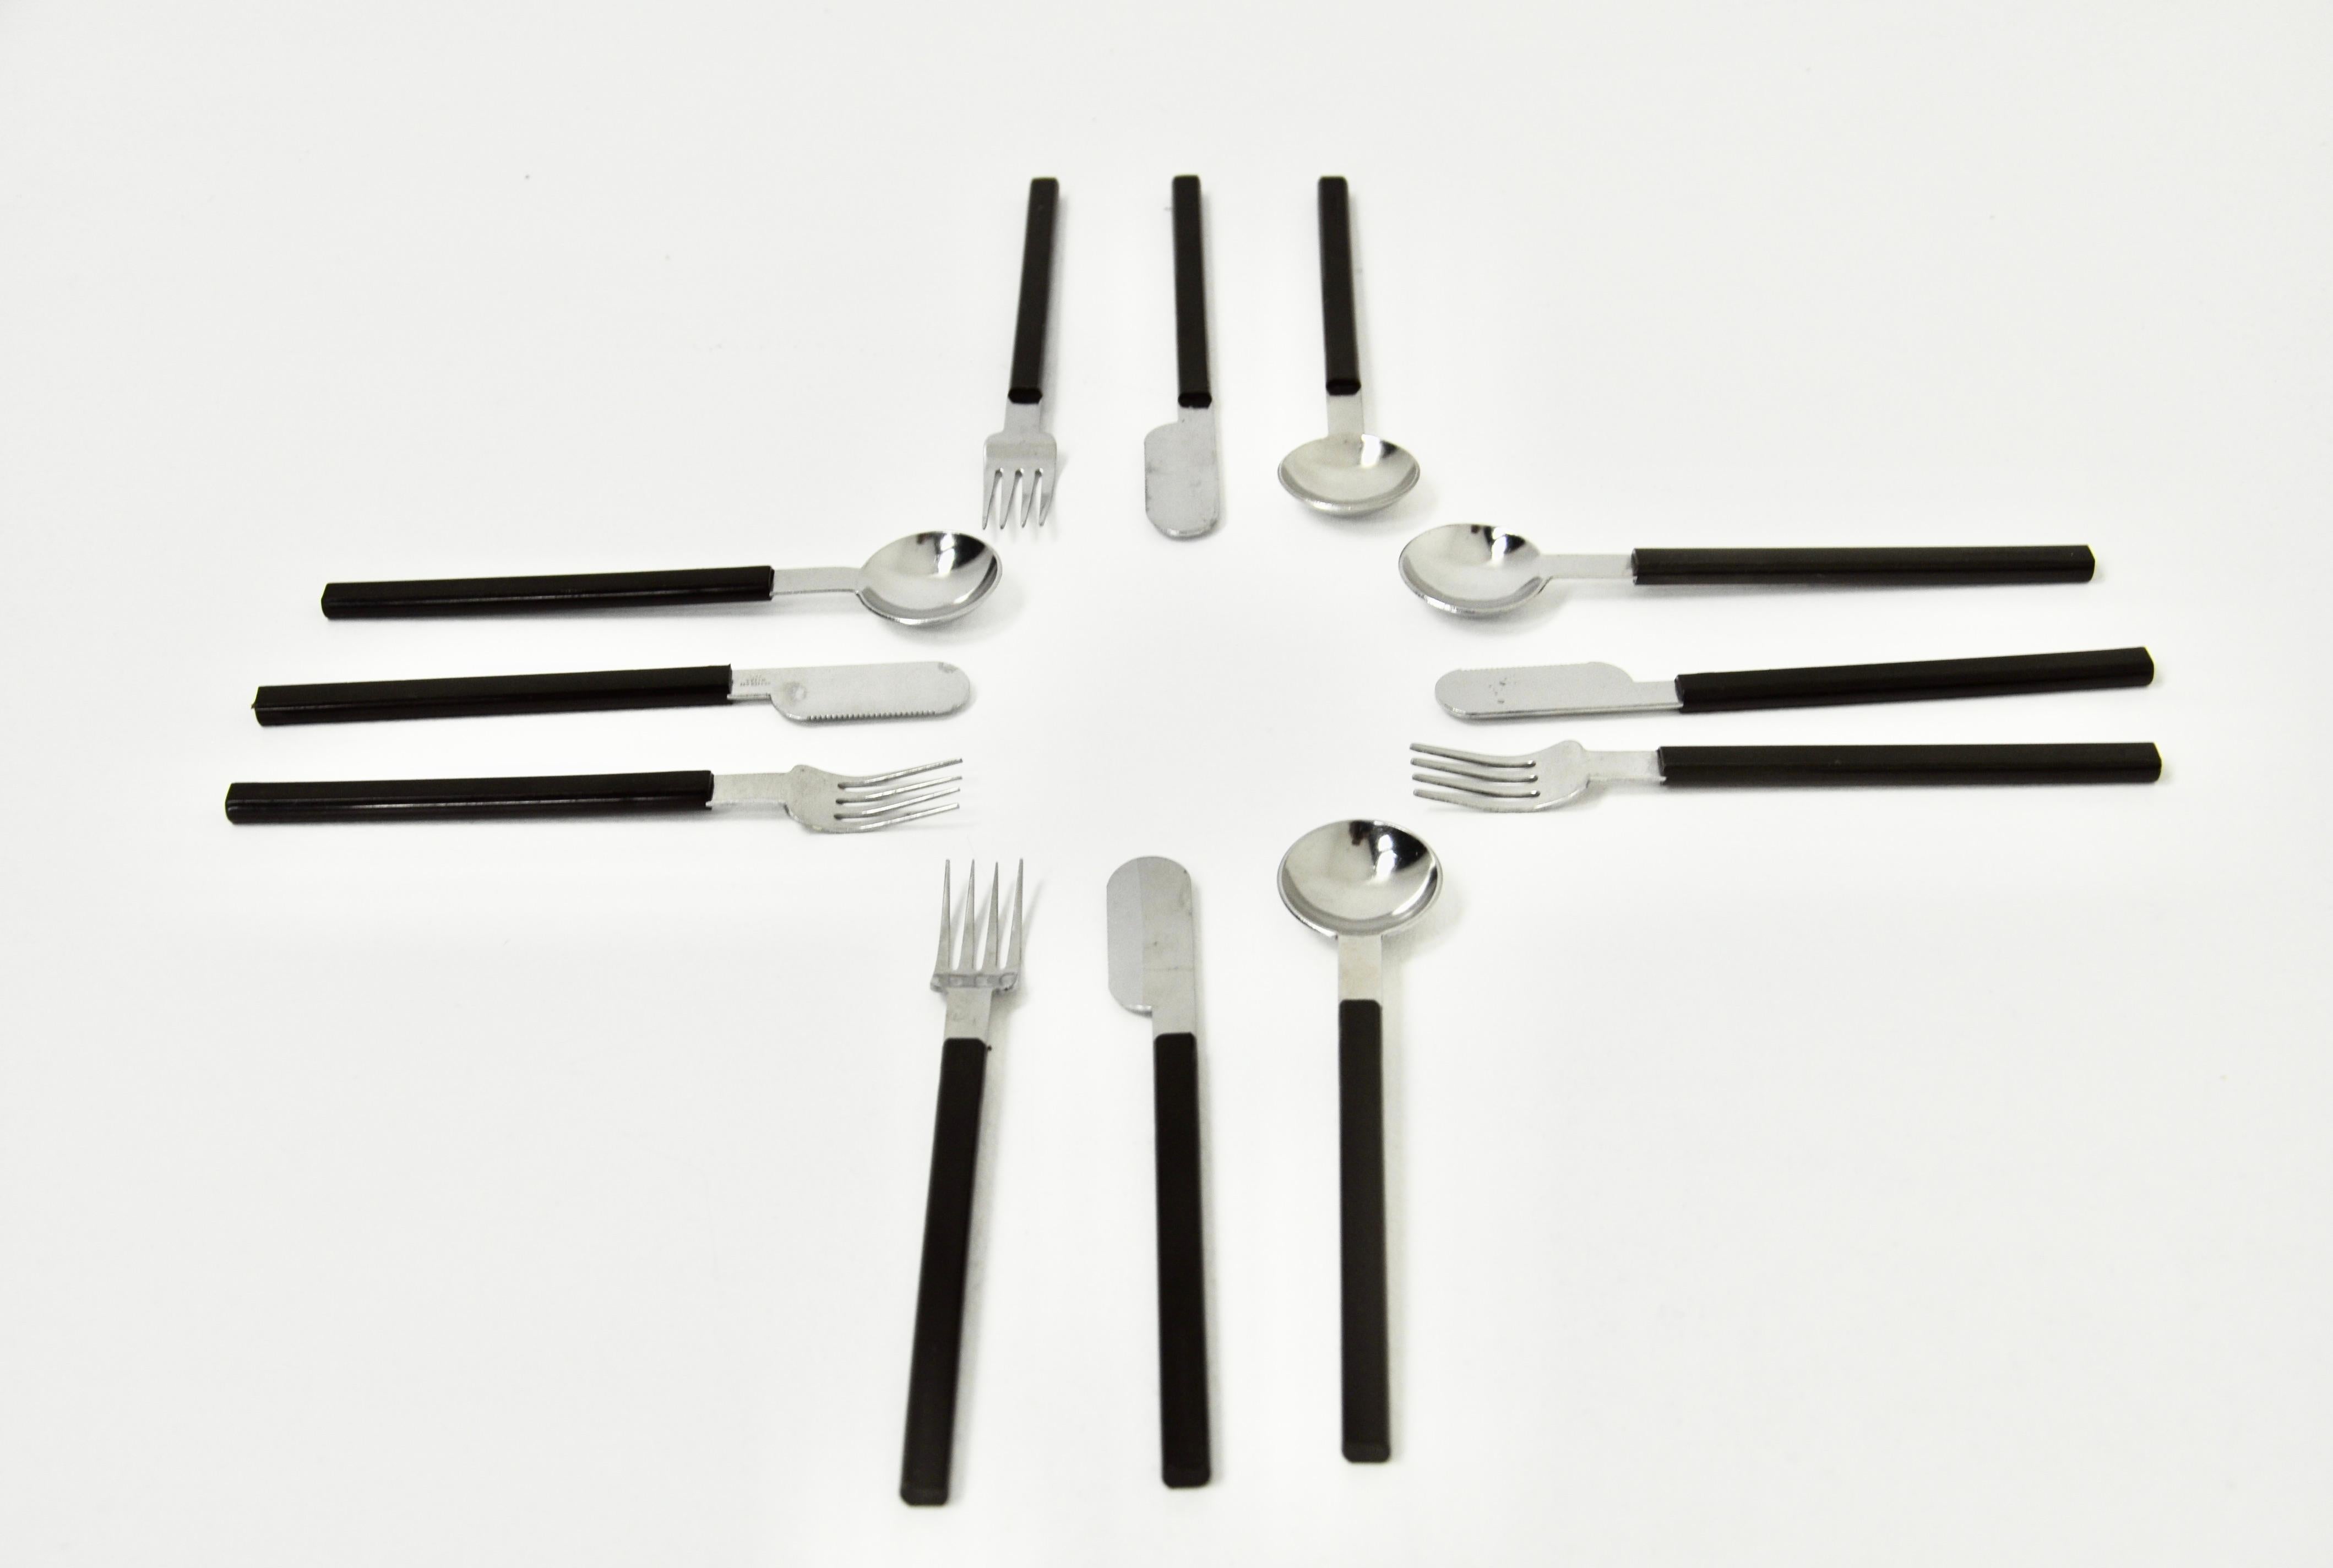 Elegant cutlery designed by Raymond Loewy for Air France's Concorde flights. Stamped Air France.
Dimensions: Length: 16 cm Width: 3 cm 